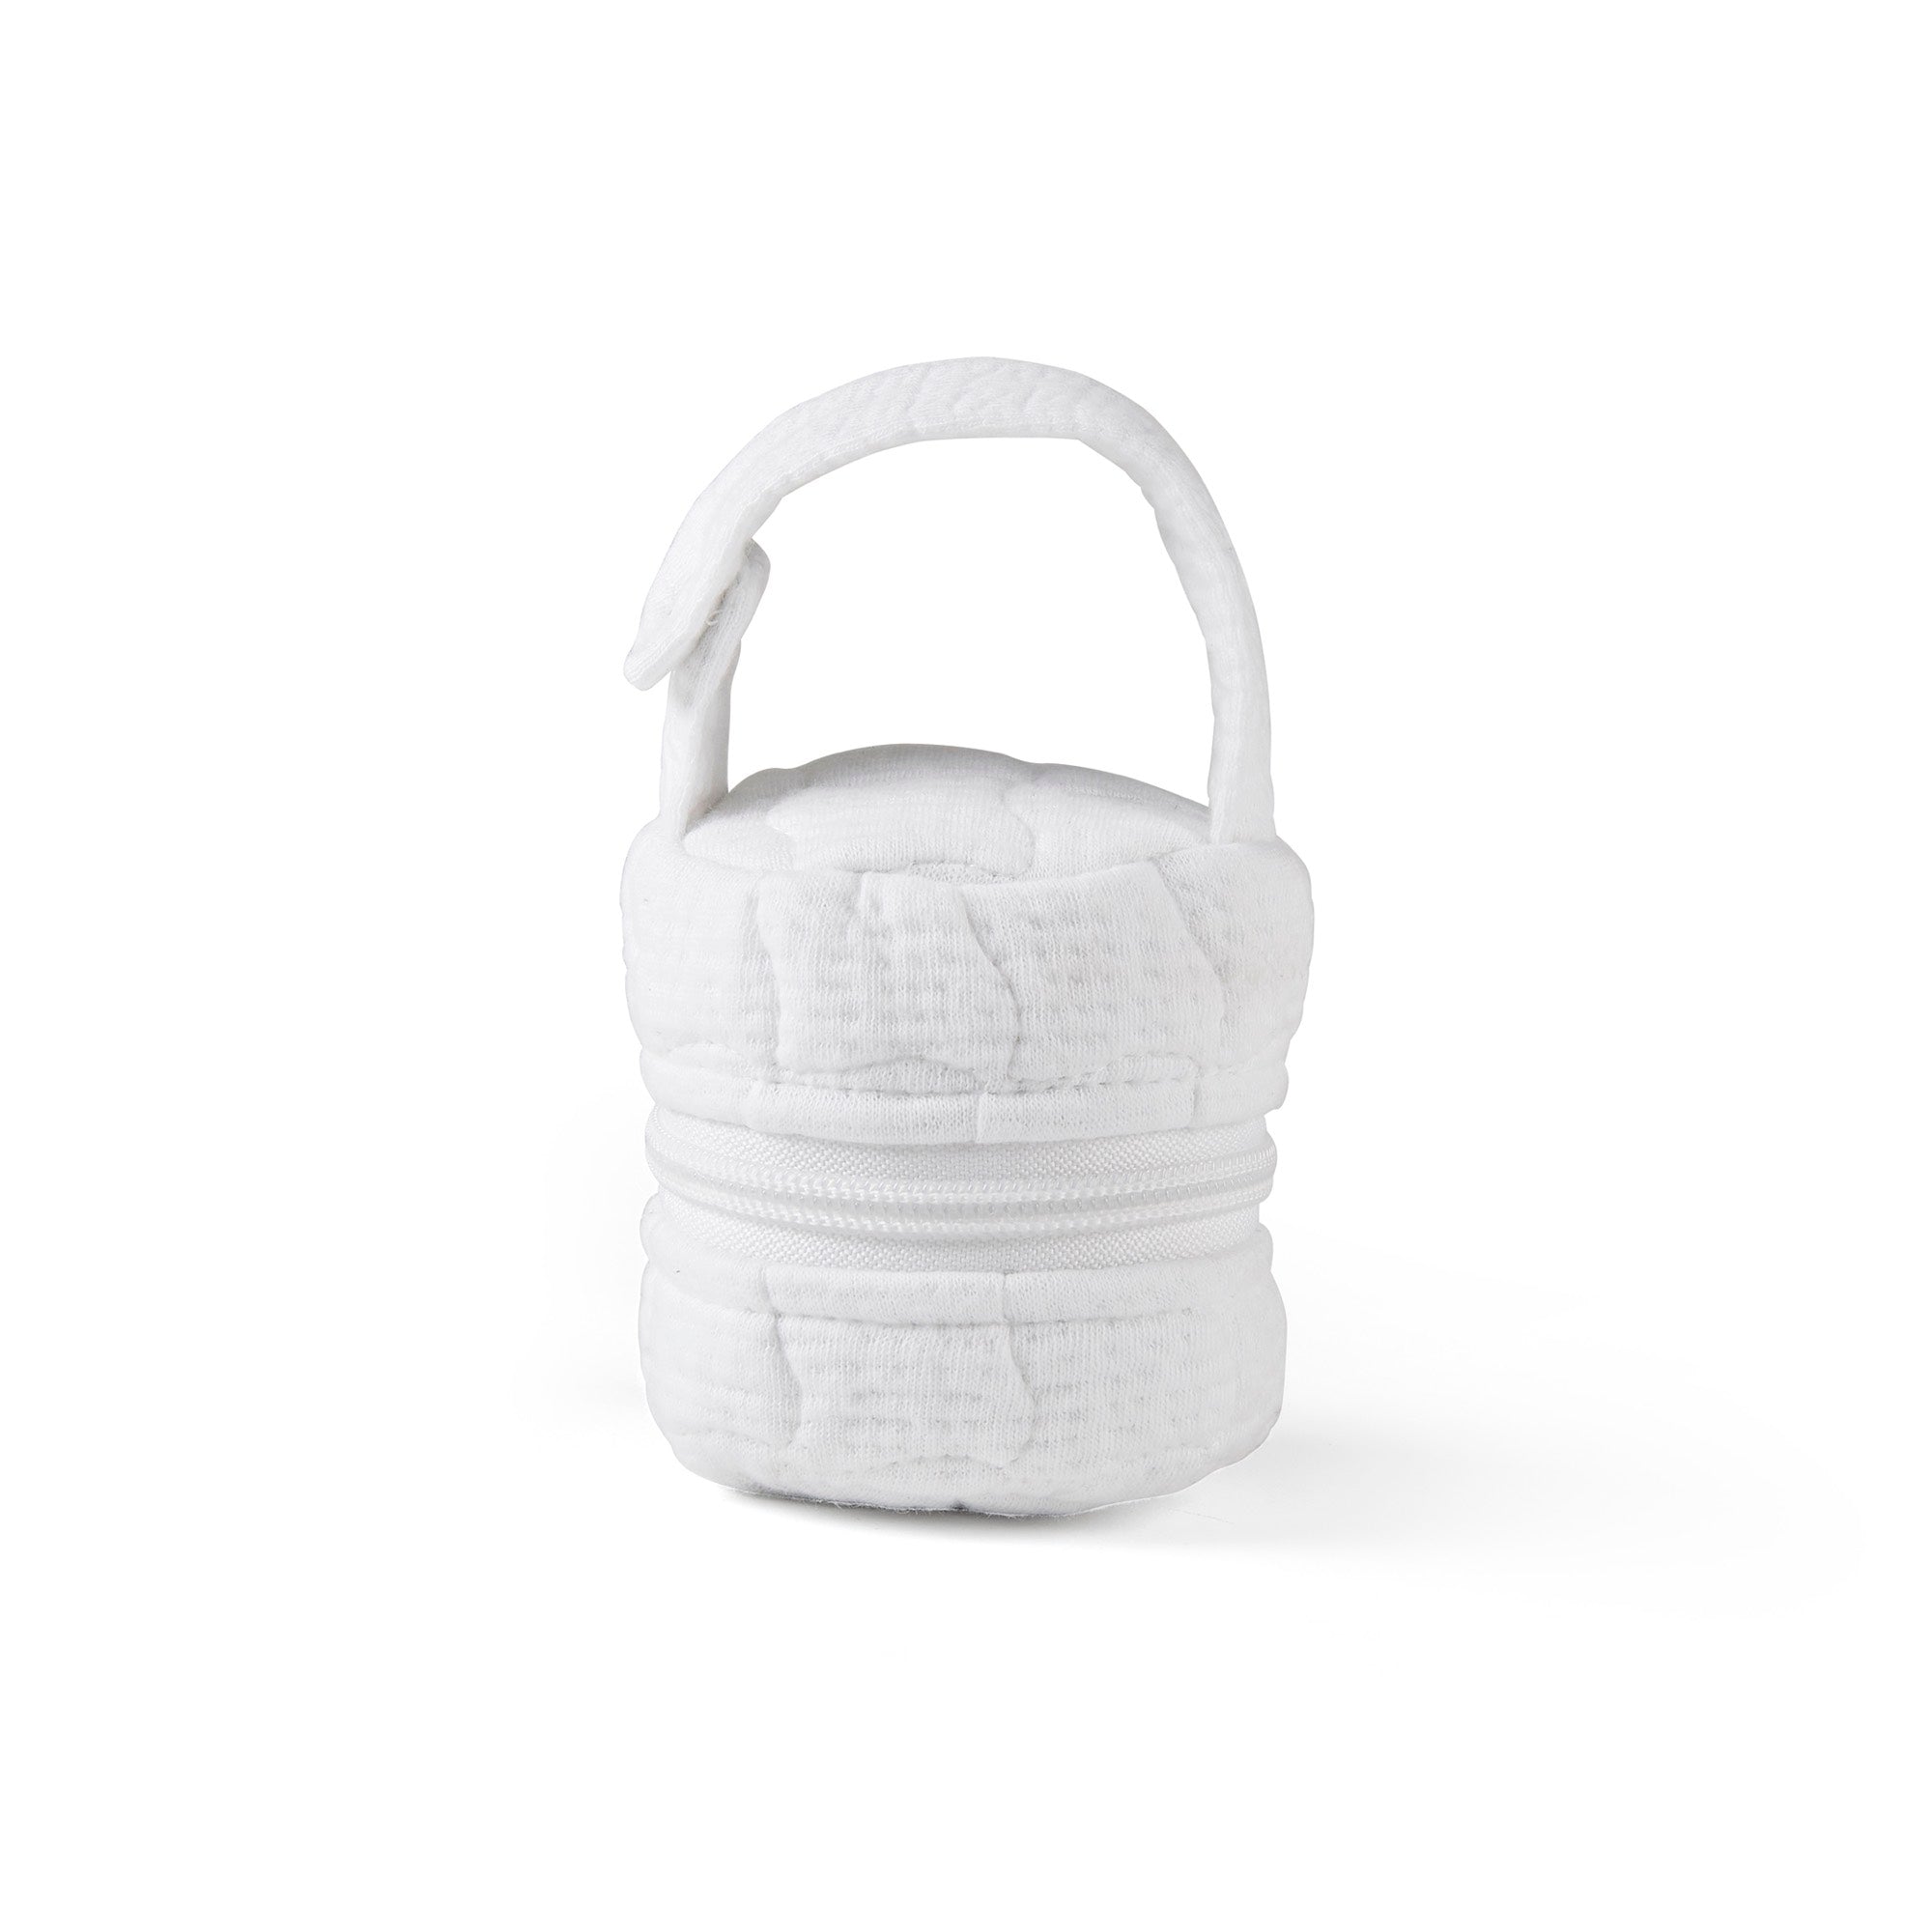 Theophile & Patachou Pacifier Cover - Cotton White